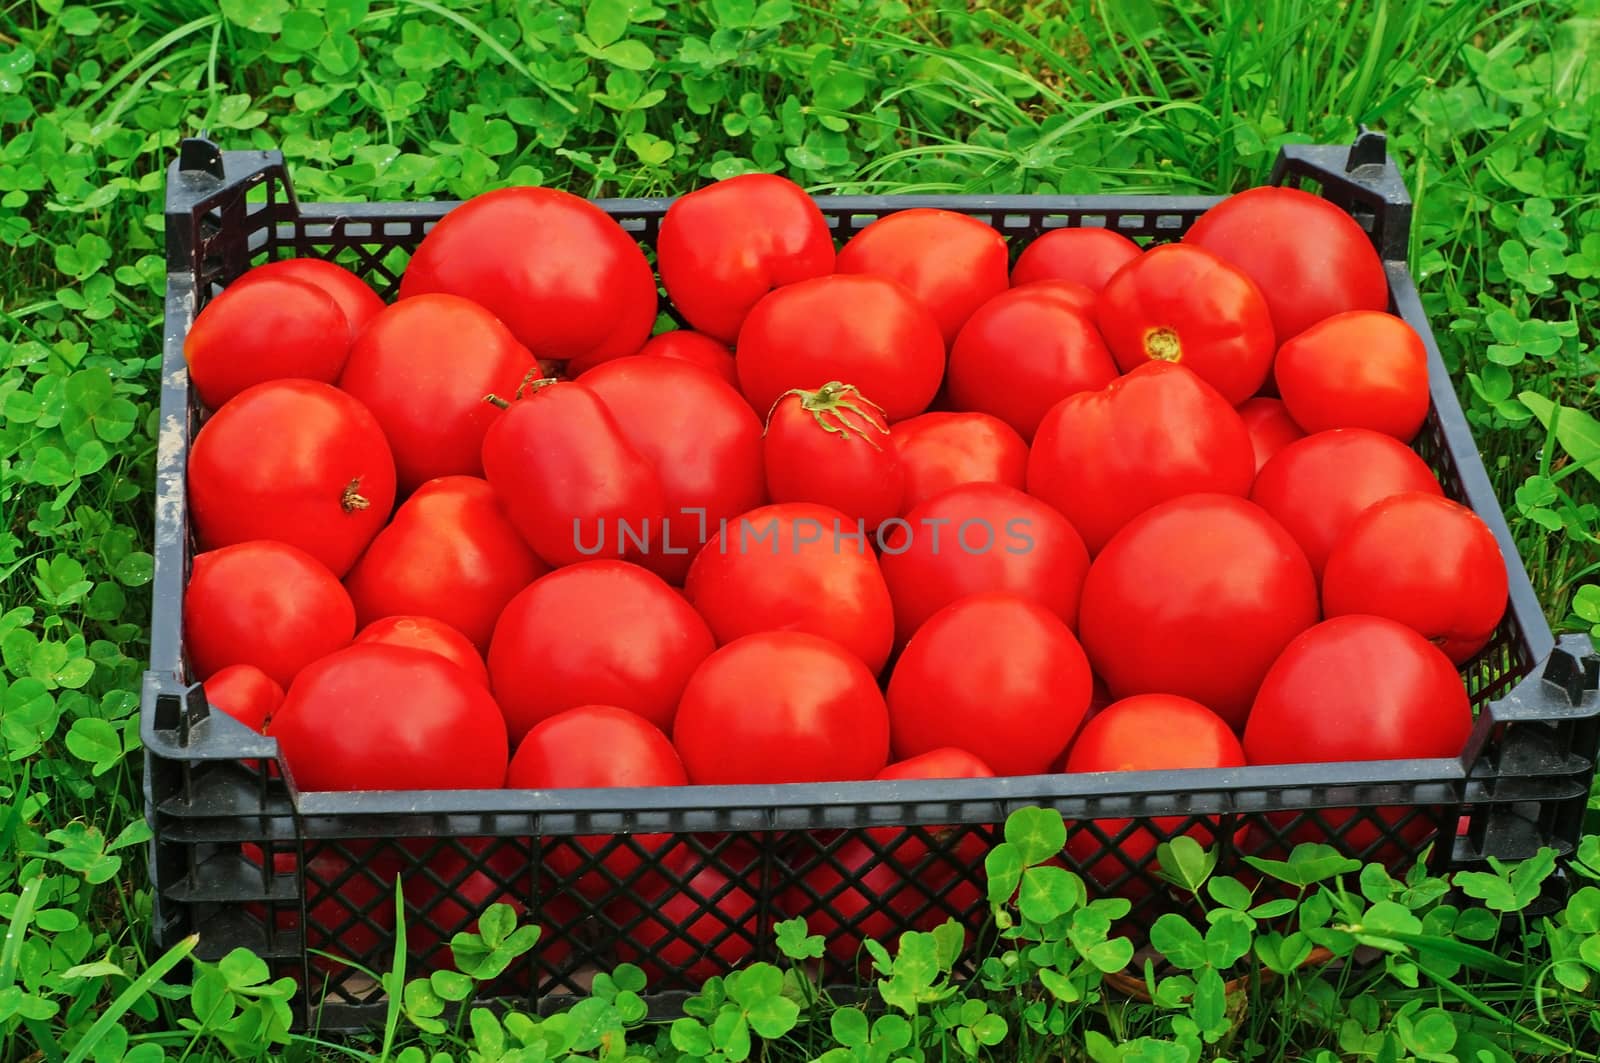 Box of ripe red tomatoes on a green grass